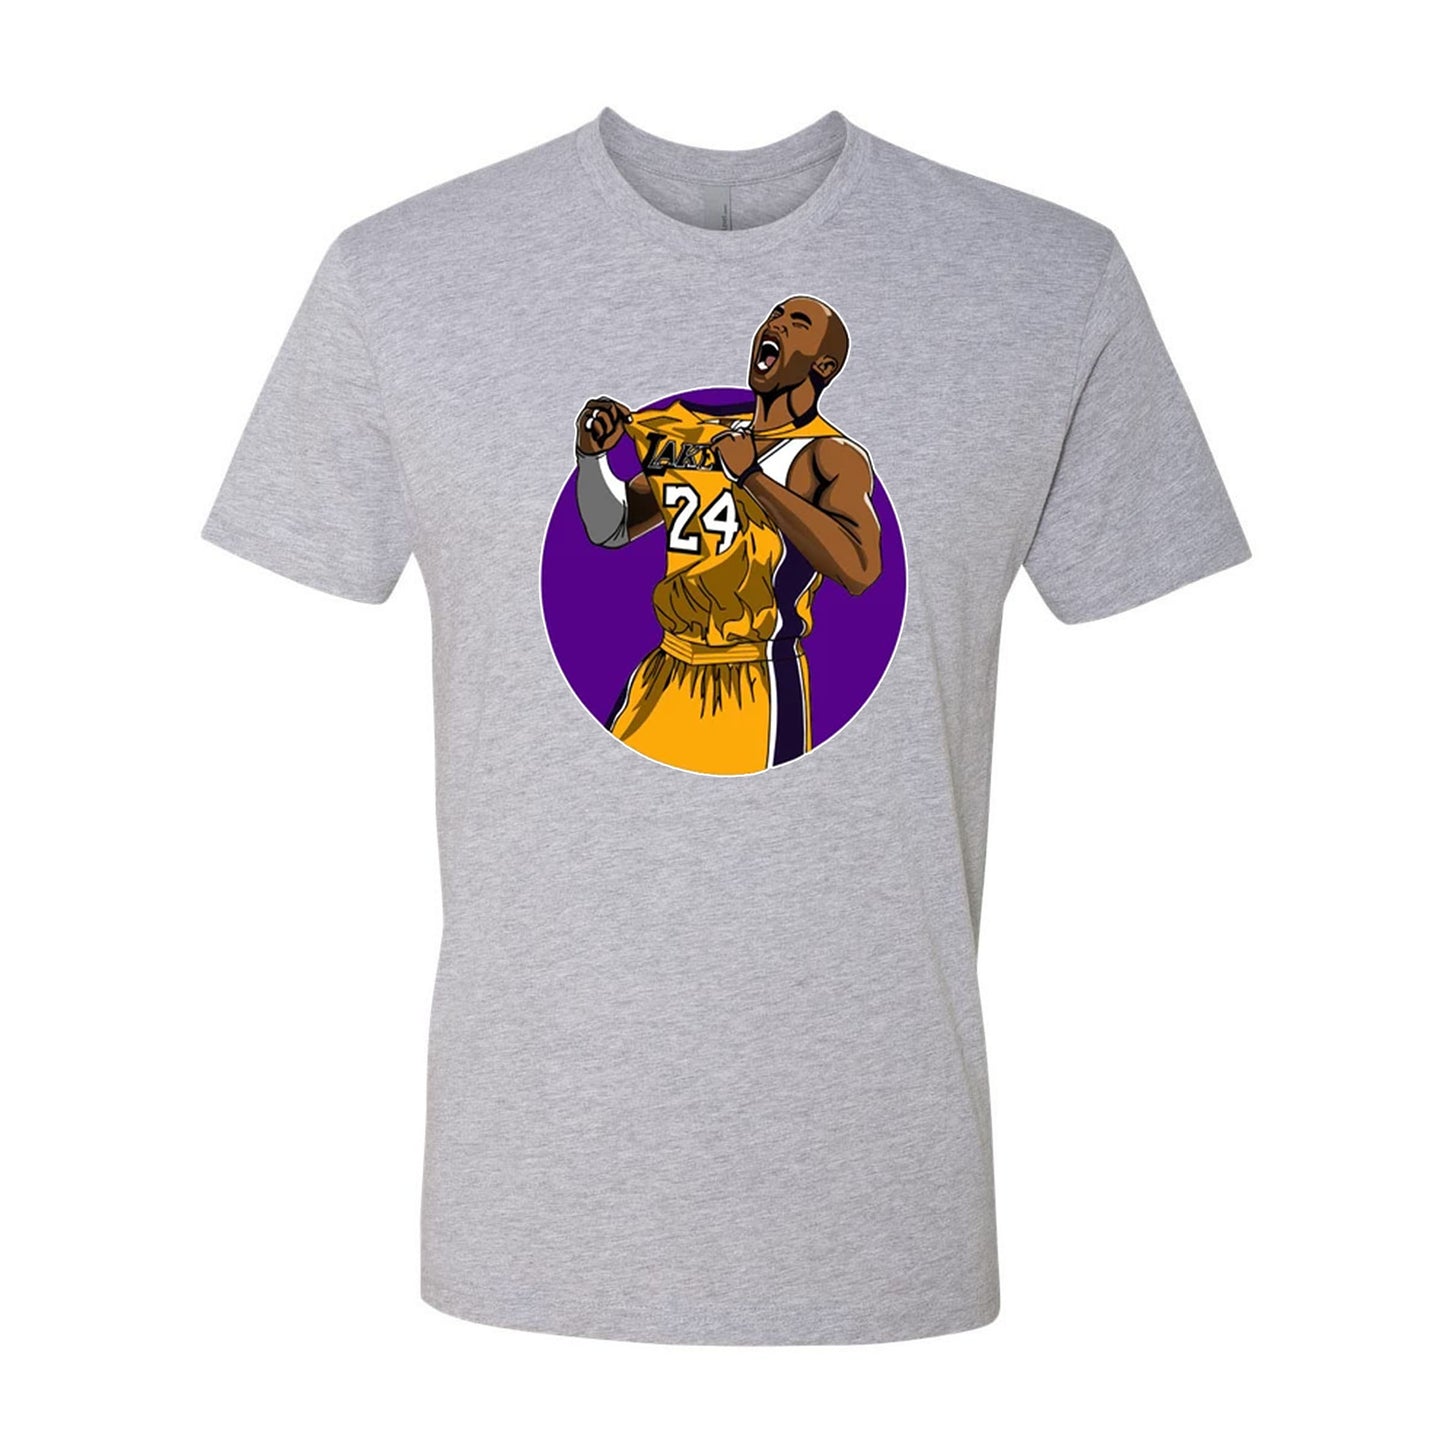 Forever Legend Los Angeles Jersey 24 Shirt LA Basketball Sports Fan Graphic Tees